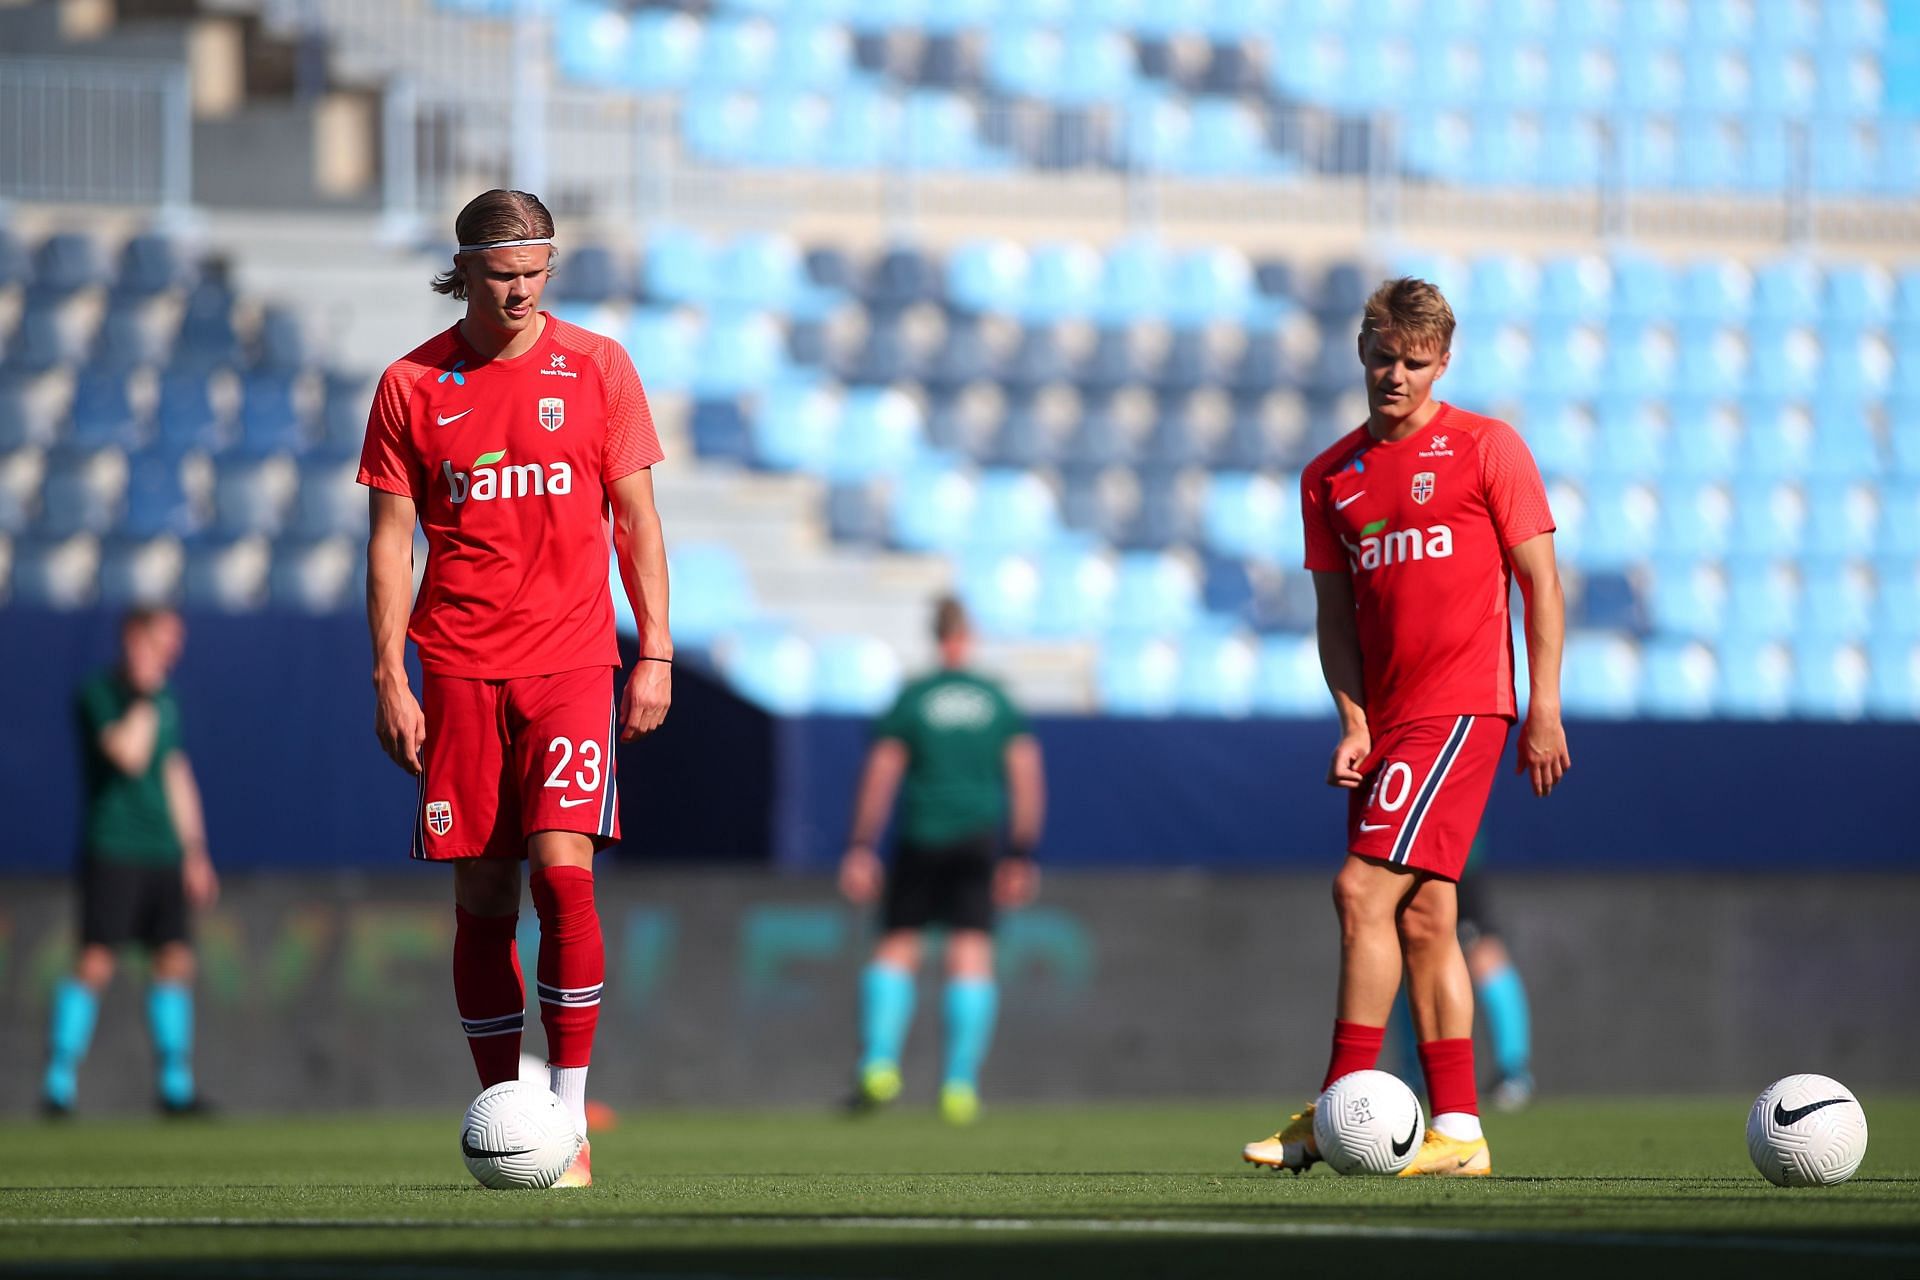 Norway and Armenia square off on Tuesday